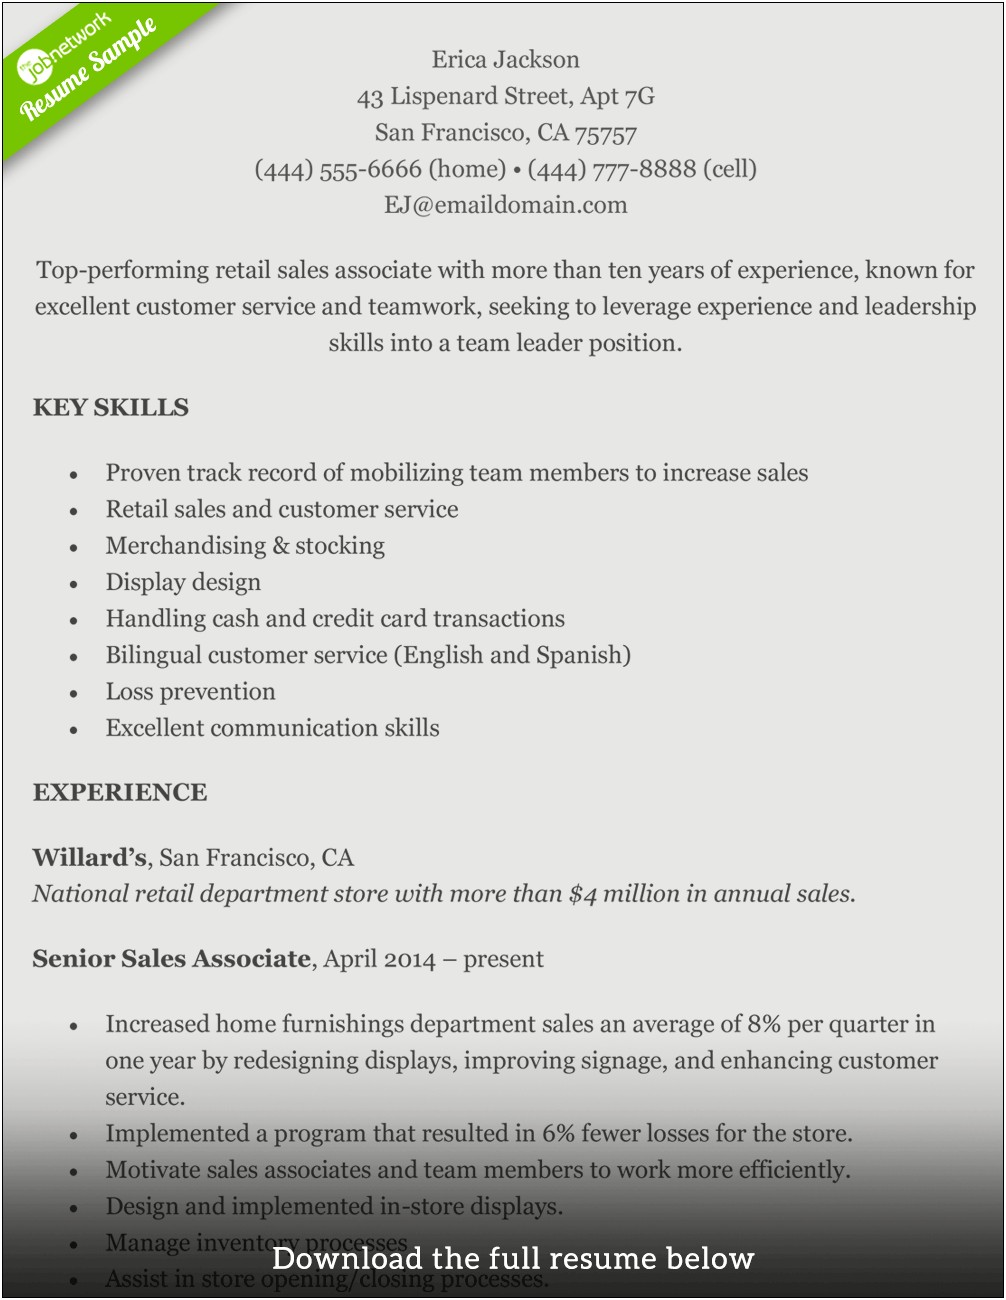 Resume For Store Manager In India